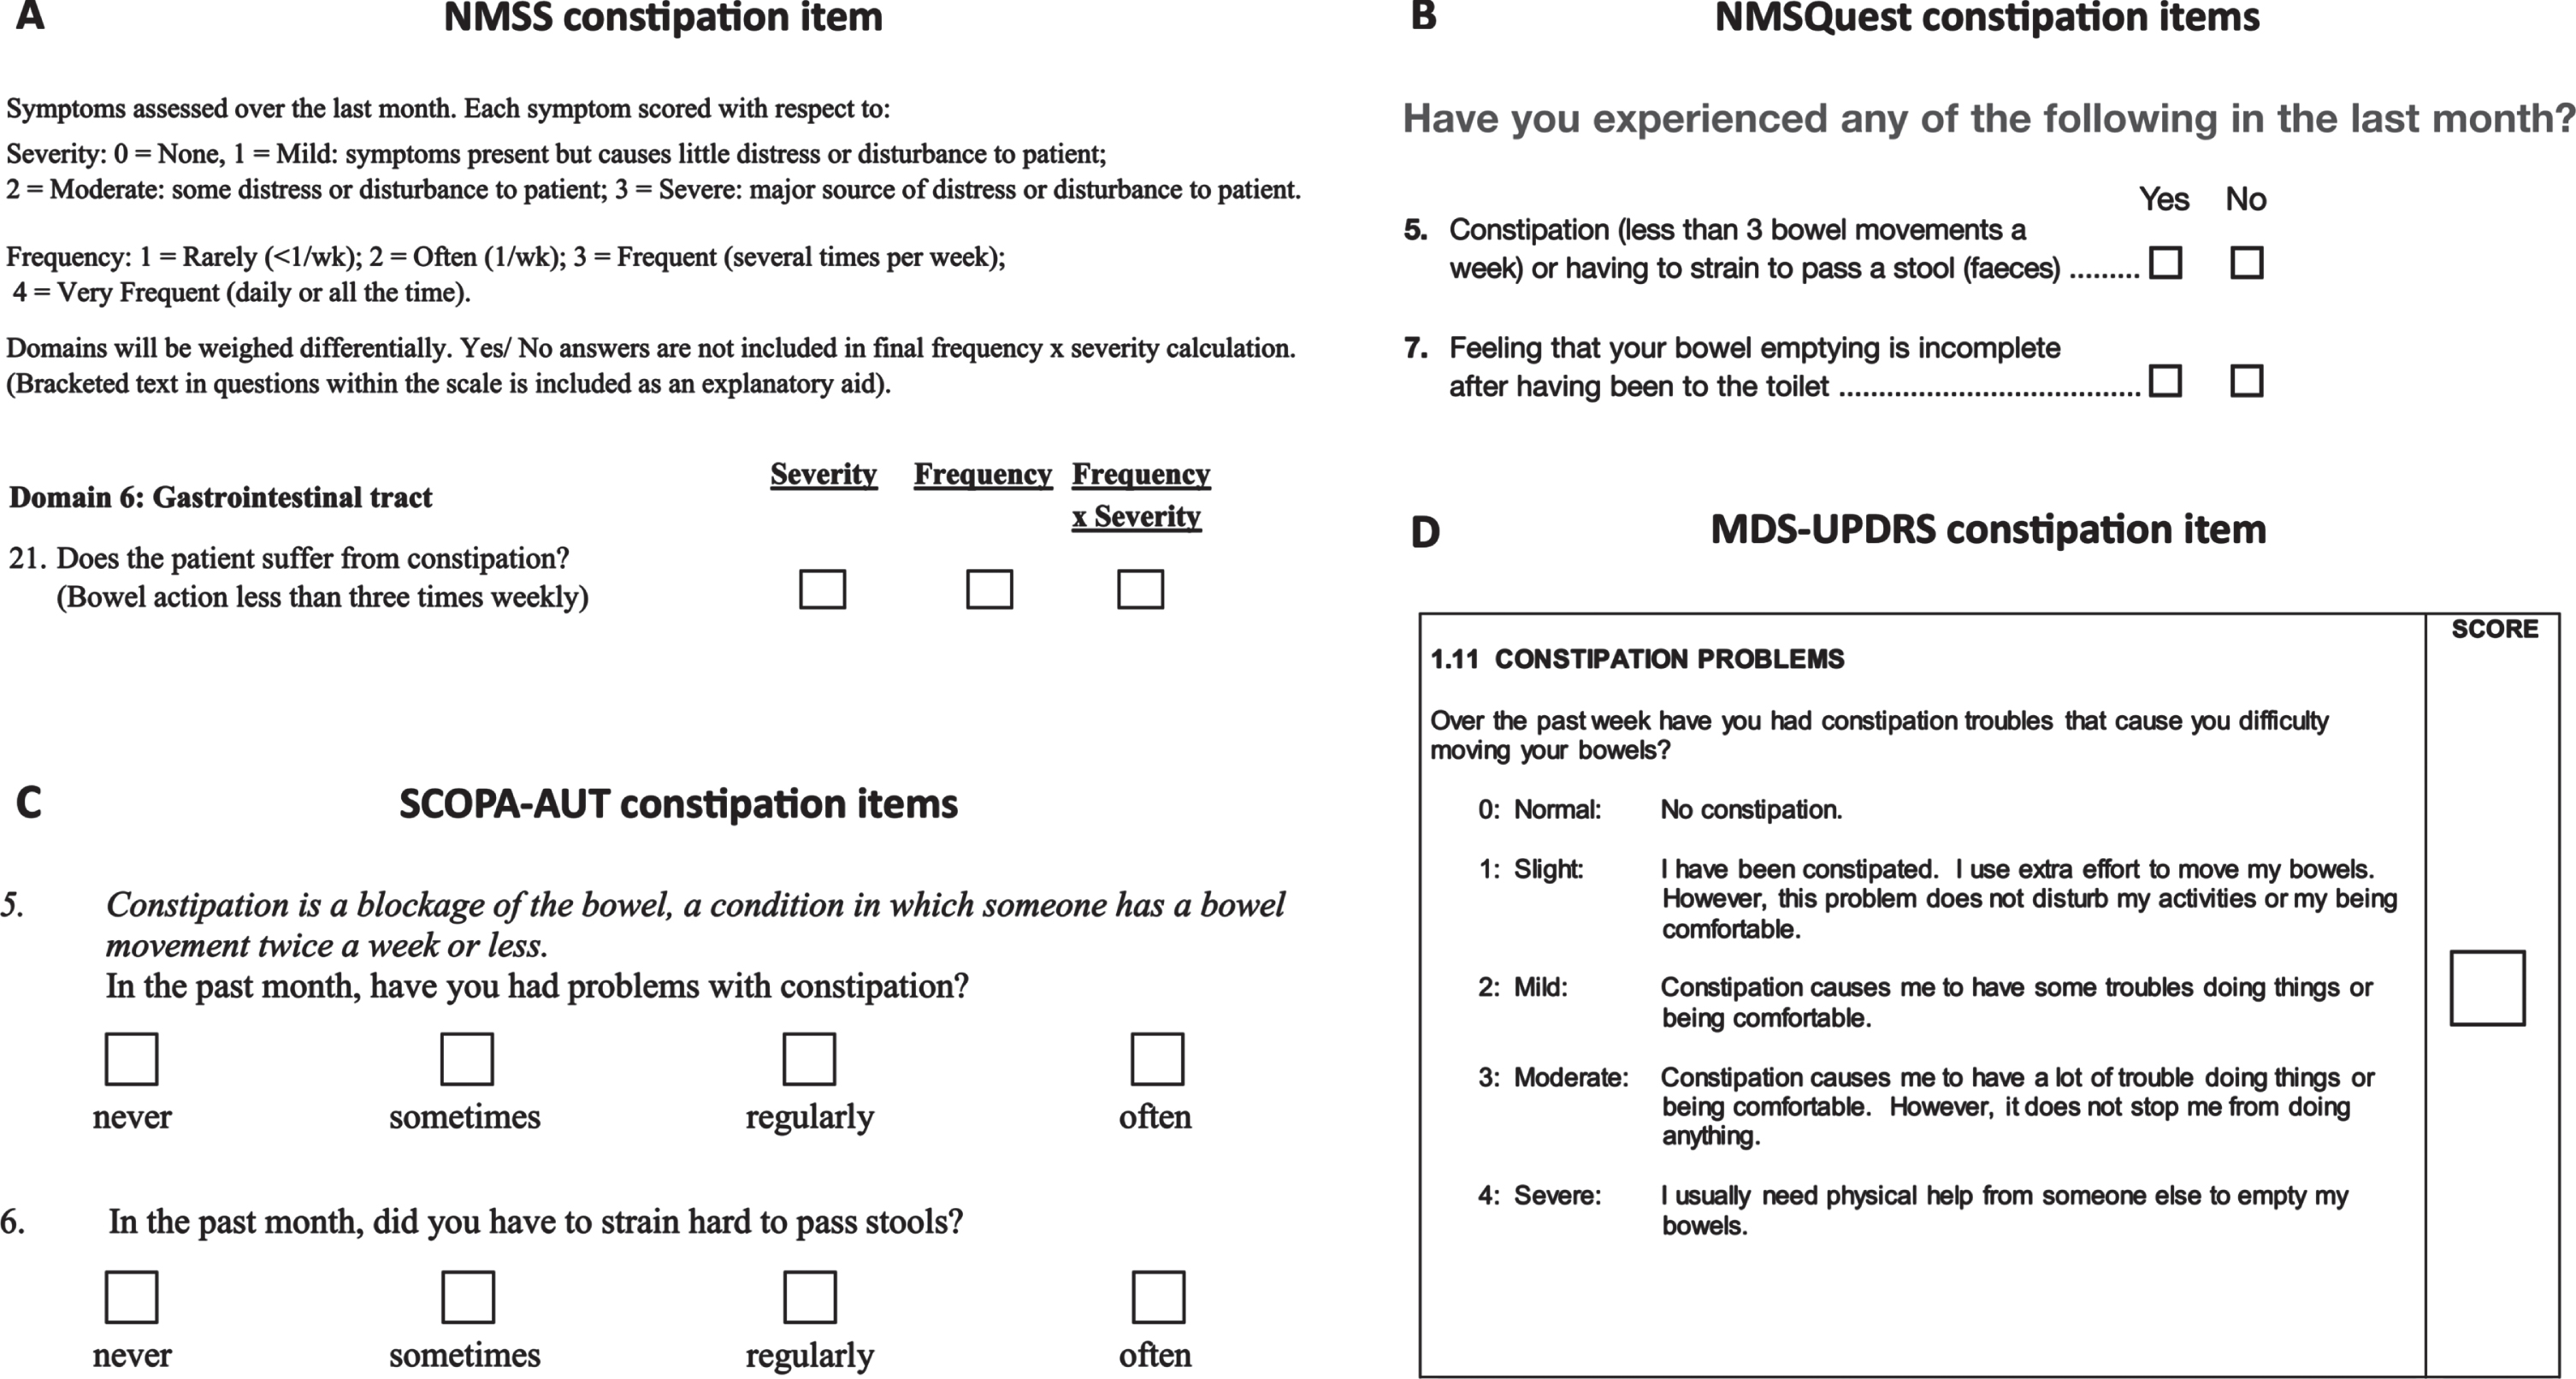 Constipation assessment items on each PD non-motor symptom questionnaire. A) The question assessing constipation on the Non-Motor Symptoms Scale (NMSS) for PD patients. This figure incorporates the NMSS, which is owned and licensed by the International Parkinson and Movement Disorder Society (MDS). Permission to reproduce the NMSS in this figure was granted by MDS, the copyright holder. Copyright © 2007 International Parkinson and Movement Disorder Society (MDS). All Rights Reserved. B) The question/s assessing constipation on the Non-Motor Symptoms Questionnaire (NMSQuest/NMSQ) for PD patients. This figure incorporates the NMSQ, which is owned and licensed by the International Parkinson and Movement Disorder Society (MDS). Permission to reproduce the NMSQ in this figure was granted by MDS, the copyright holder. Copyright © 2006 International Parkinson and Movement Disorder Society (MDS). All Rights Reserved. C) The question/s assessing constipation on the SCOPA-AUT (SCales for Outcomes in PArkinson’s disease — AUTonmic dysfunction). This figure incorporates the SCOPA-AUT, which is owned and licensed by the International Parkinson and Movement Disorder Society (MDS). Permission to reproduce the SCOPA-AUT in this figure was granted by MDS, the copyright holder. Copyright © 2019 International Parkinson and Movement Disorder Society (MDS). All Rights Reserved. D) The item assessing constipation on the Unified Parkinson’s Disease Rating Scale (MDS-UPDRS). This figure incorporates the MDS-UPDRS, which is owned and licensed by the International Parkinson and Movement Disorder Society (MDS). Permission to reproduce the MDS-UPDRS in this figure was granted by MDS, the copyright holder. Copyright © 2008 International Parkinson and Movement Disorder Society (MDS). All Rights Reserved.